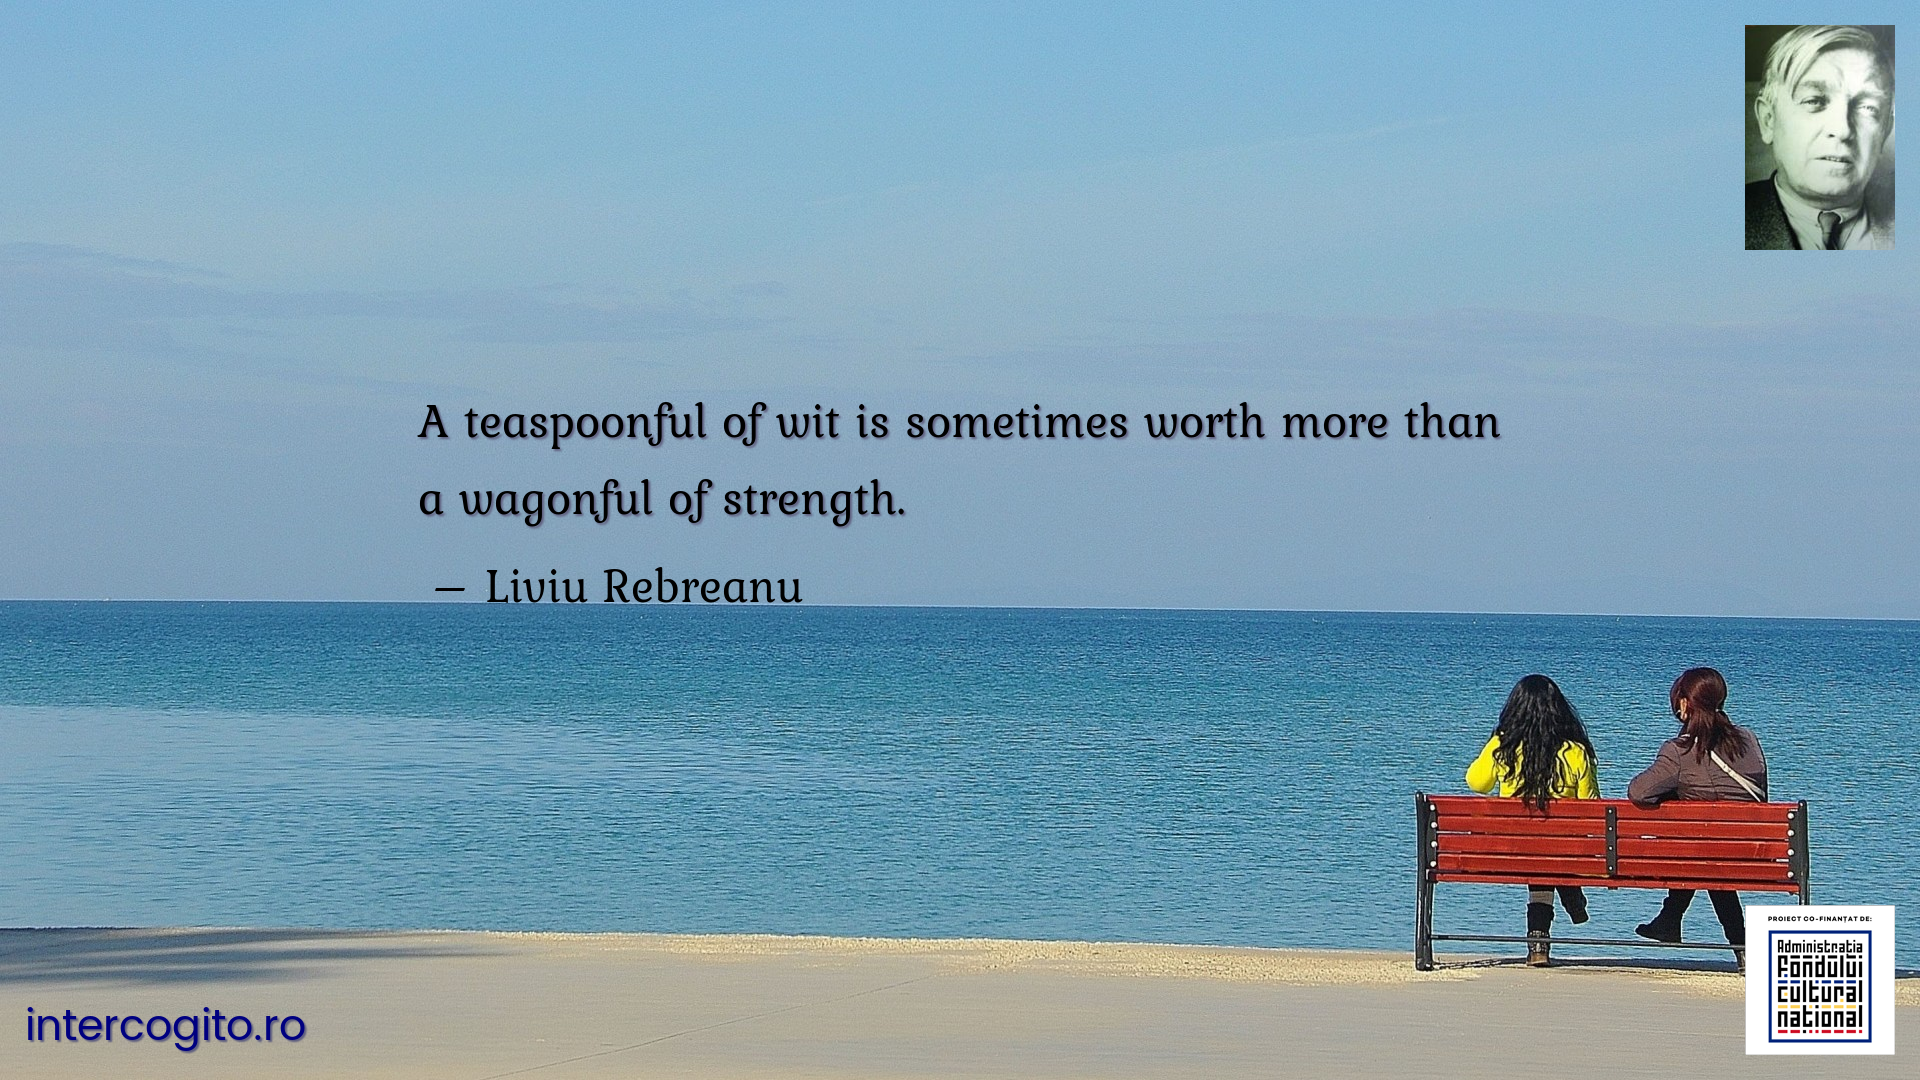 A teaspoonful of wit is sometimes worth more than a wagonful of strength.